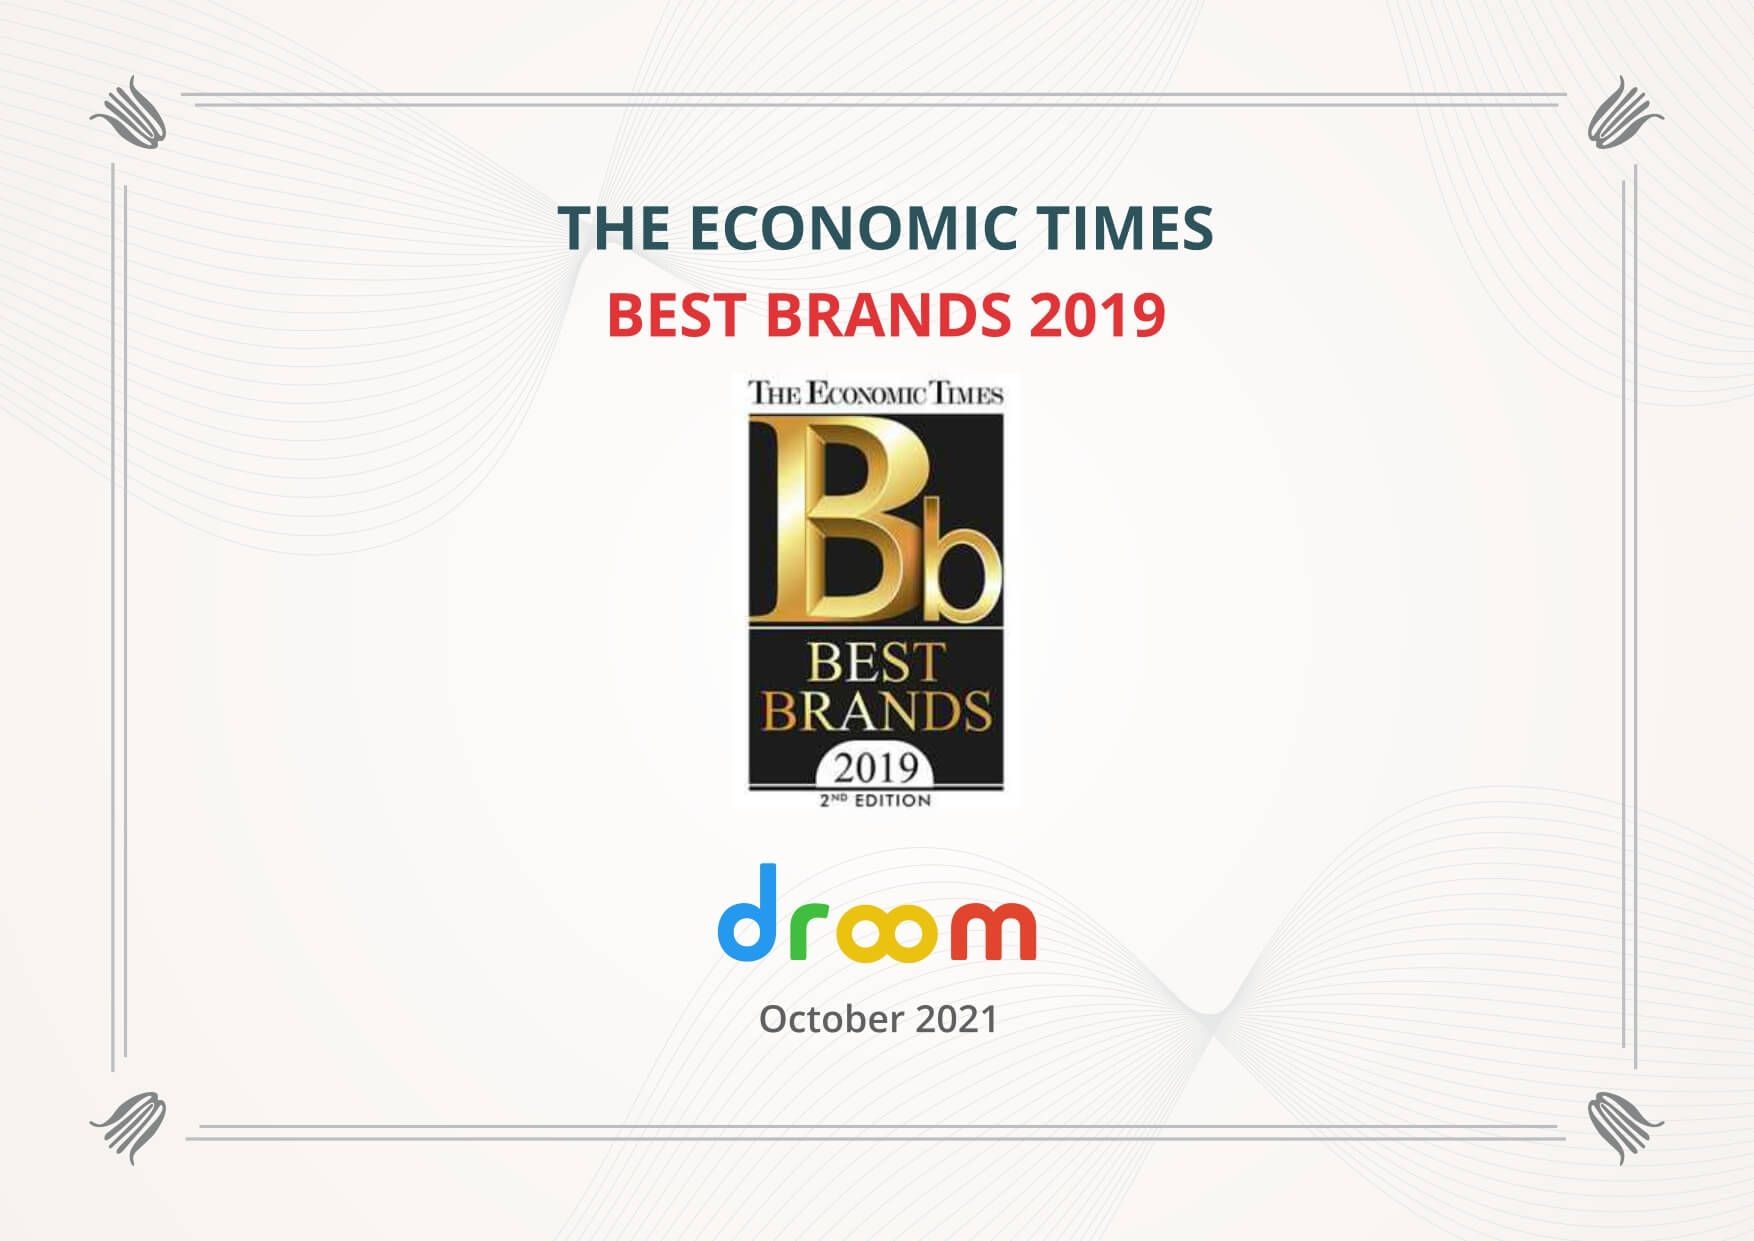 Droom amongst the best brands 2019 by Economic Times